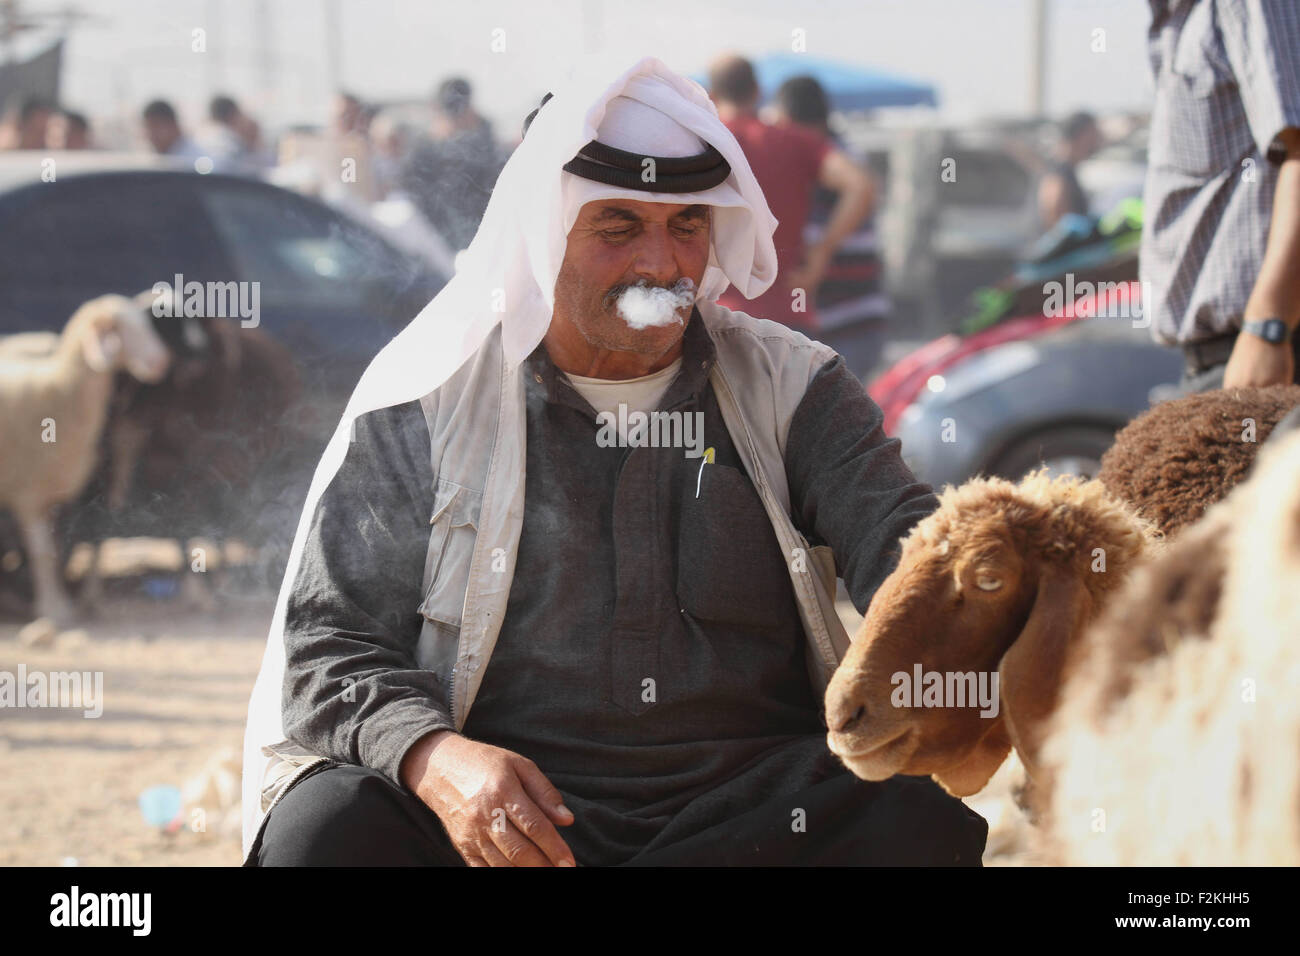 Nablus, West Bank, Palestinian Territory. 21st Sep, 2015. Palestinians gather at the main livestock market days before the major Muslim festival of Eid al-Adha holiday in the West Bank city of Nablus, on Sept. 21, 2015. Eid al-Adha, or Feast of Sacrifice, commemorates what Muslims believe was Prophet Abraham's willingness to sacrifice his son. It is a festive holiday where it is traditional for men, women and children to dress in new clothing and spend time with their families outdoo Credit:  Nedal Eshtayah/APA Images/ZUMA Wire/Alamy Live News Stock Photo